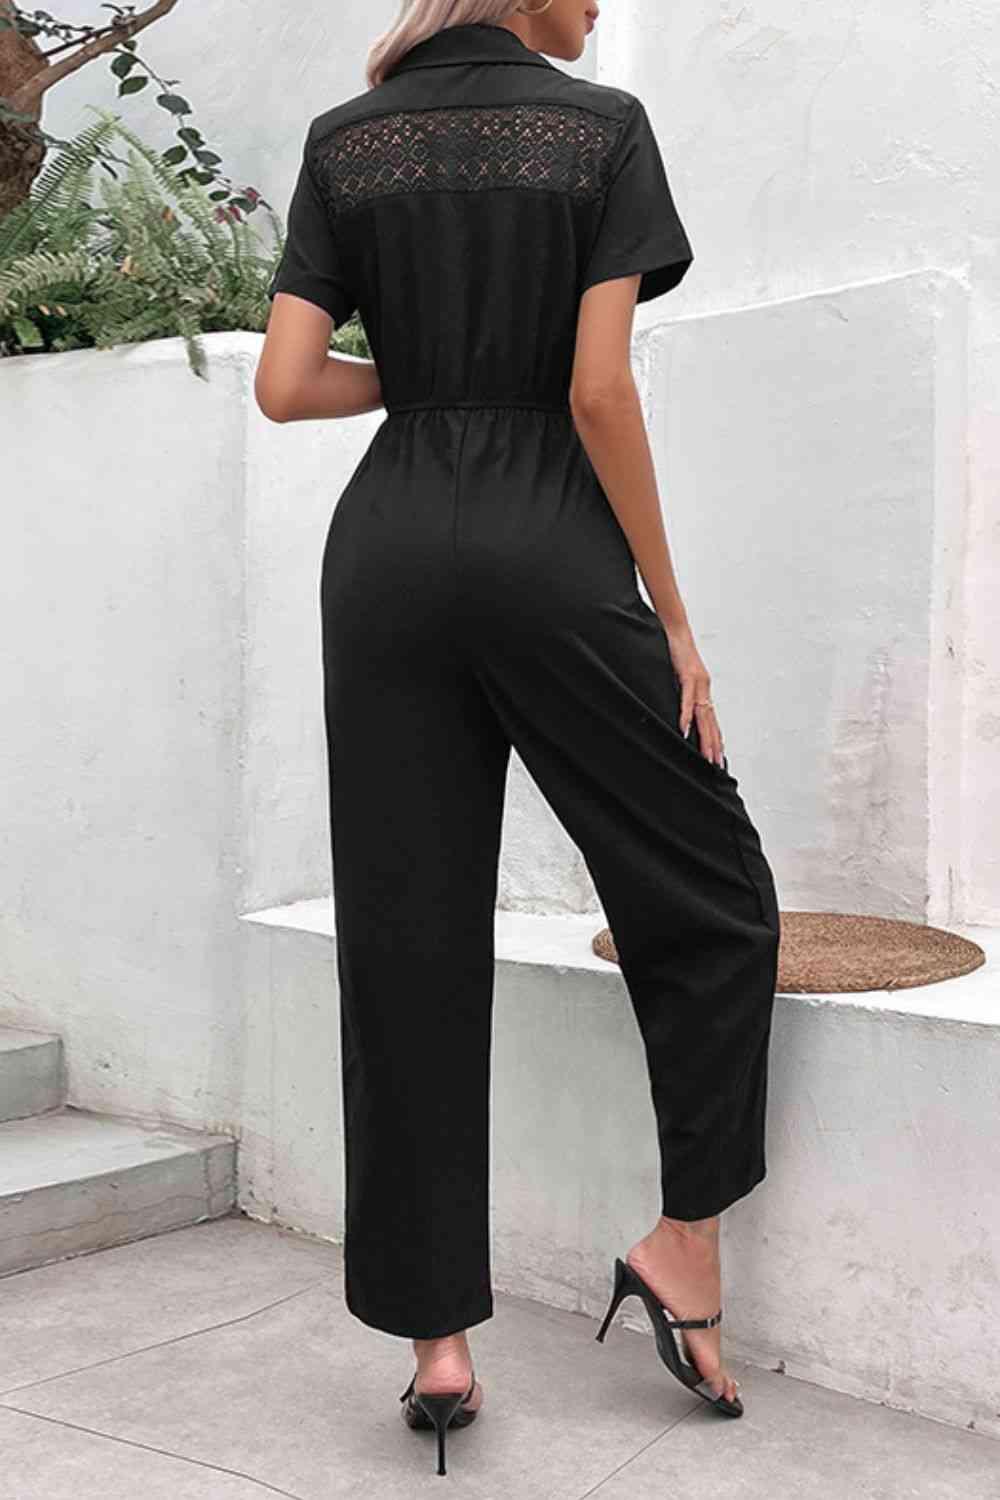 a woman wearing a black jumpsuit and heels